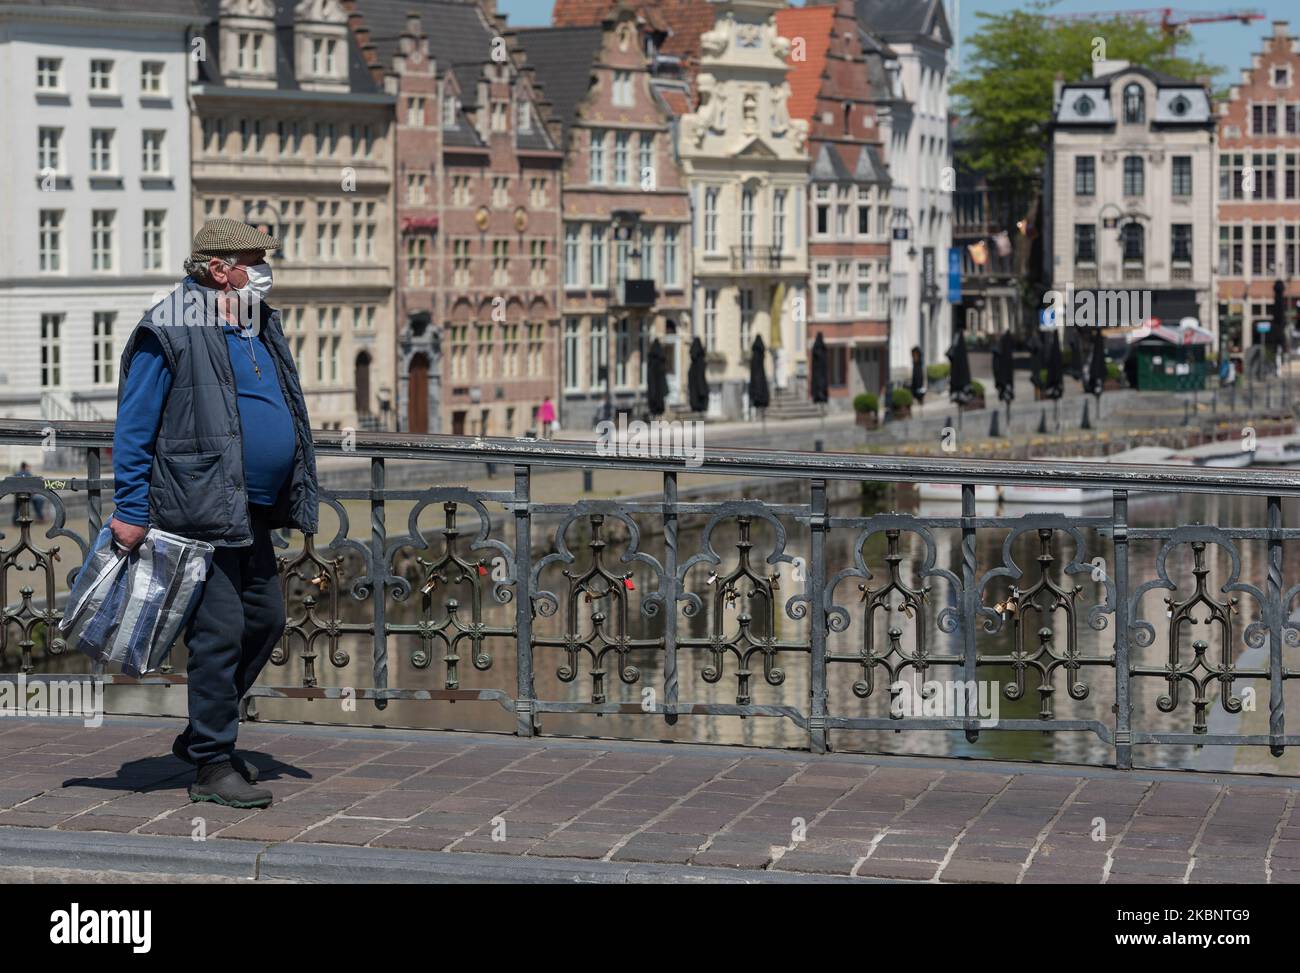 A man is seen walking with face mask as a precaution against transmission of the coronavirus in Ghent - Belgium 15 May 2020. Belgium compulsory face mask on public transport and strongly recommended in other places. Belgium start with the opening of shops allowing more people to work again,on condition. Belgium start cautiously with a way out of the corona measures.(Photo by Jonathan Raa/NurPhoto) Stock Photo